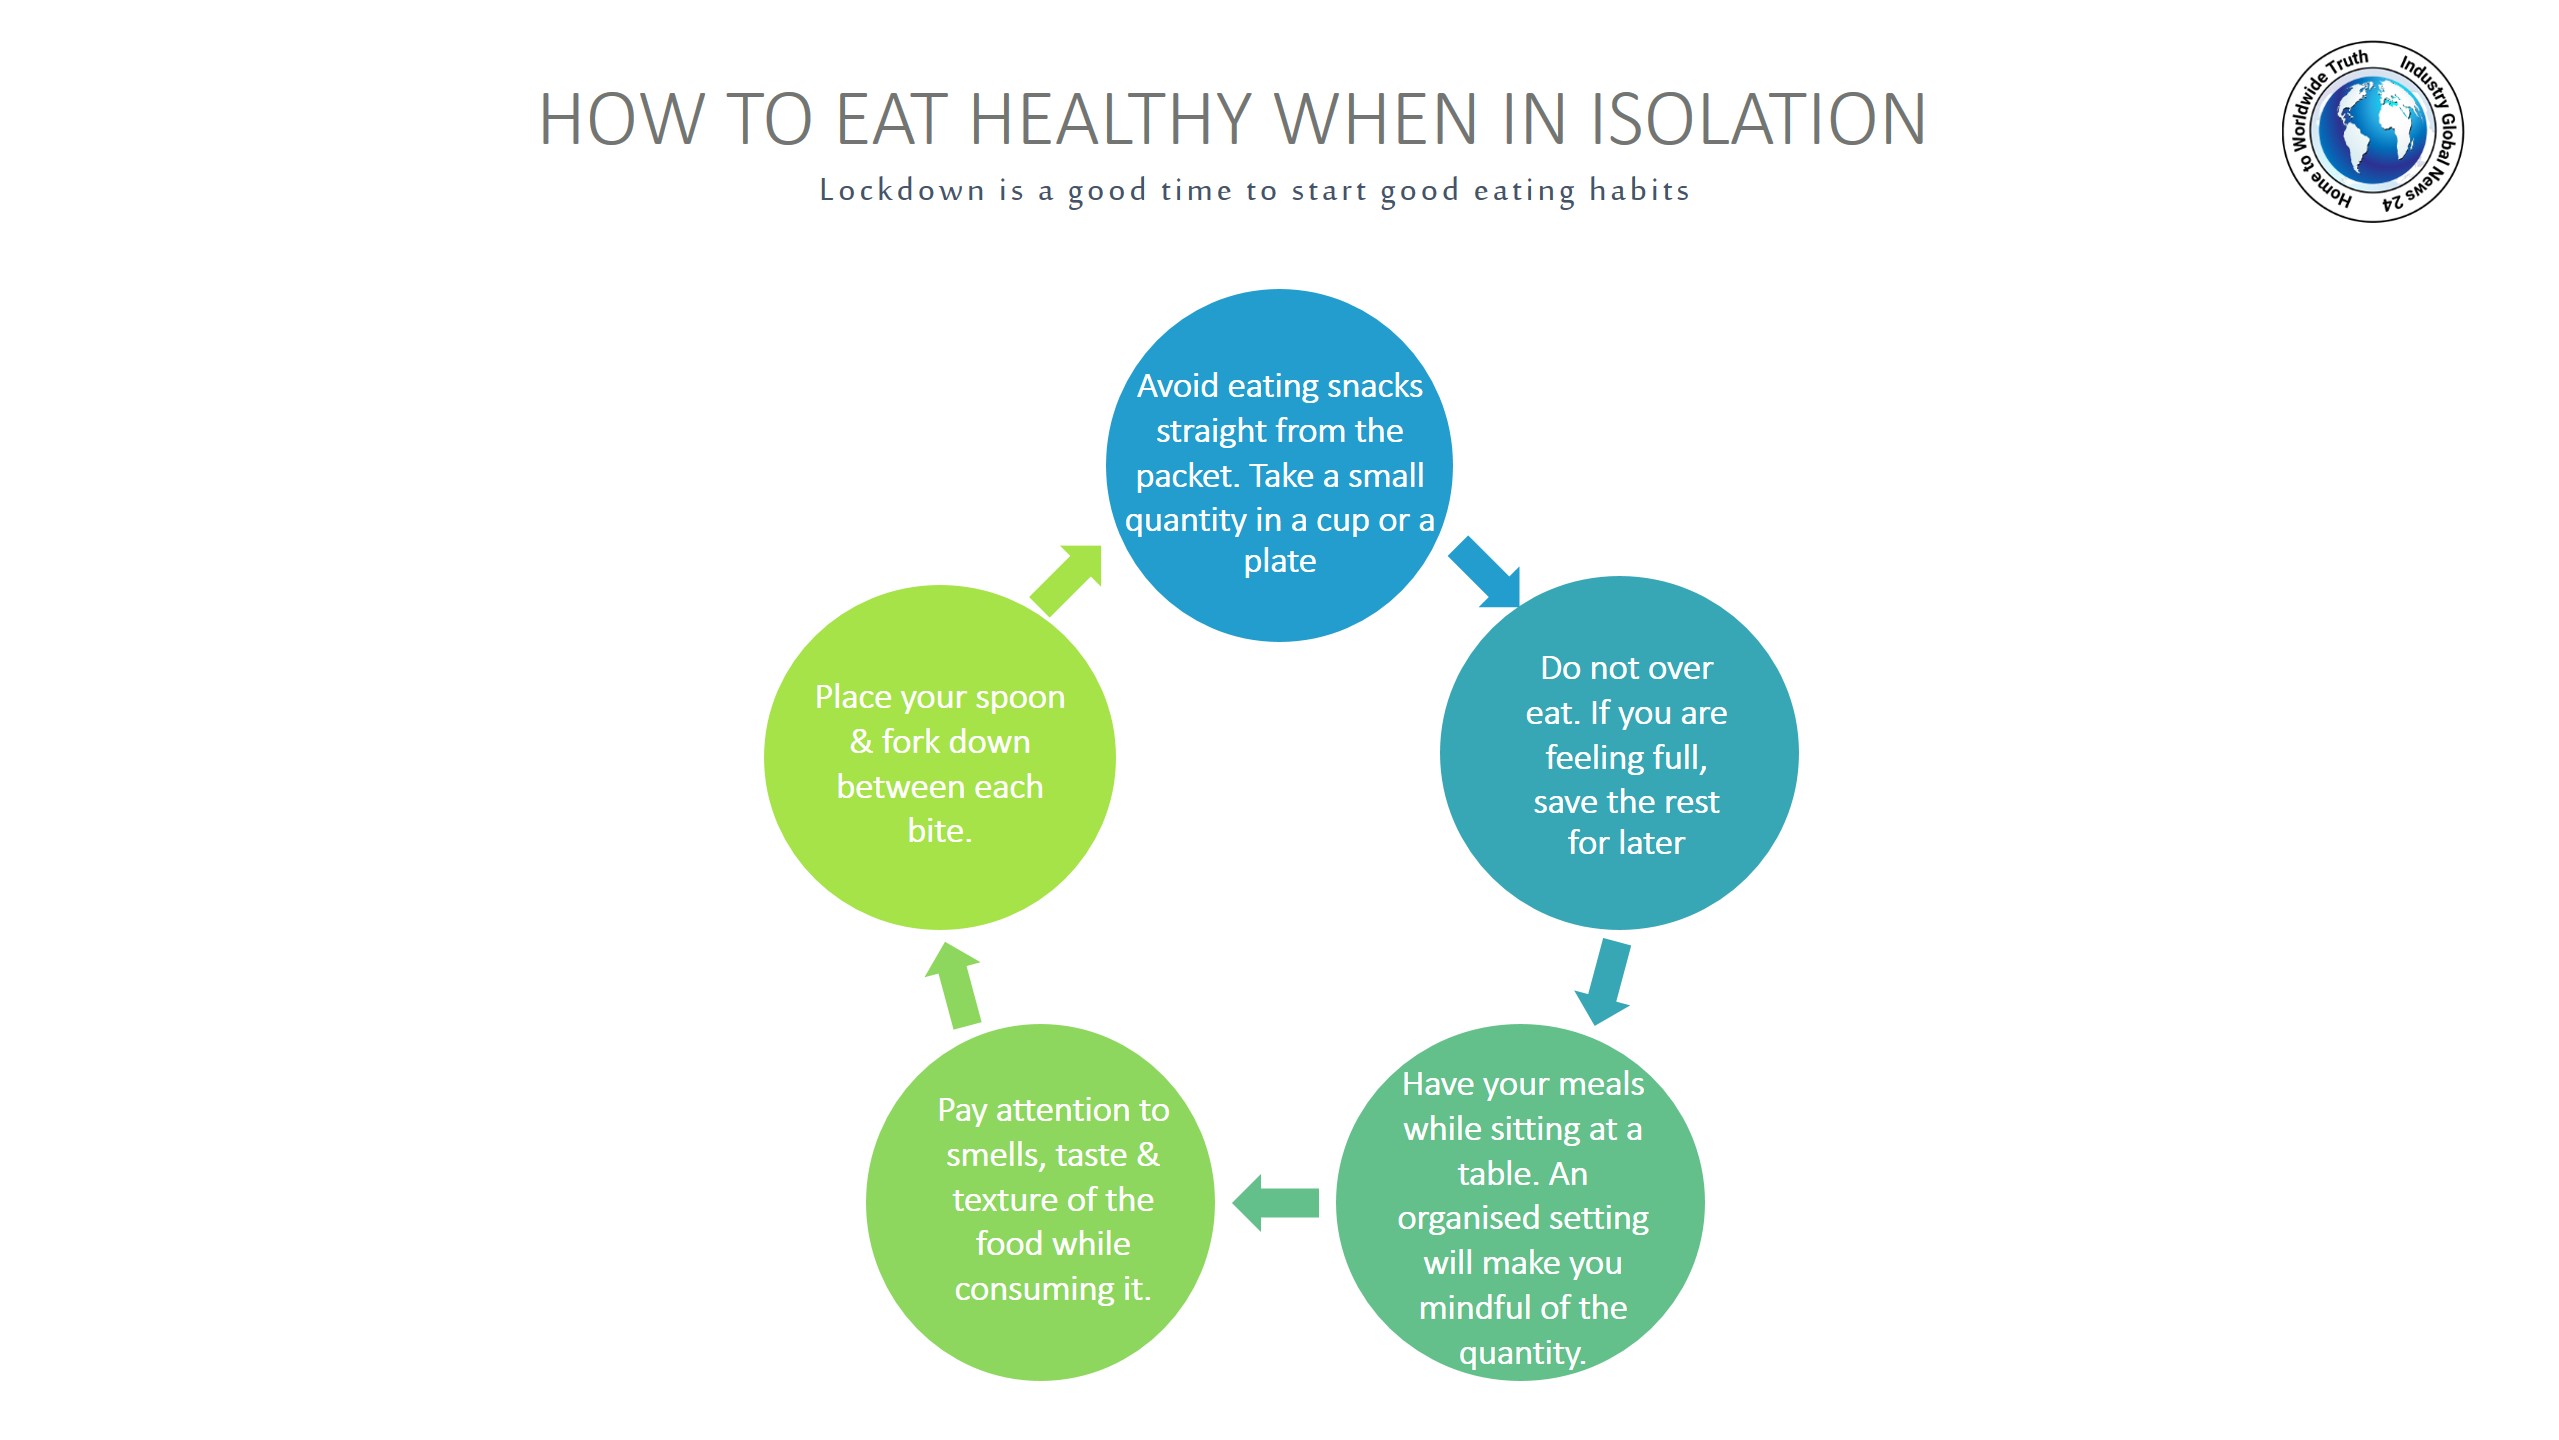 How to eat healthy when in isolation